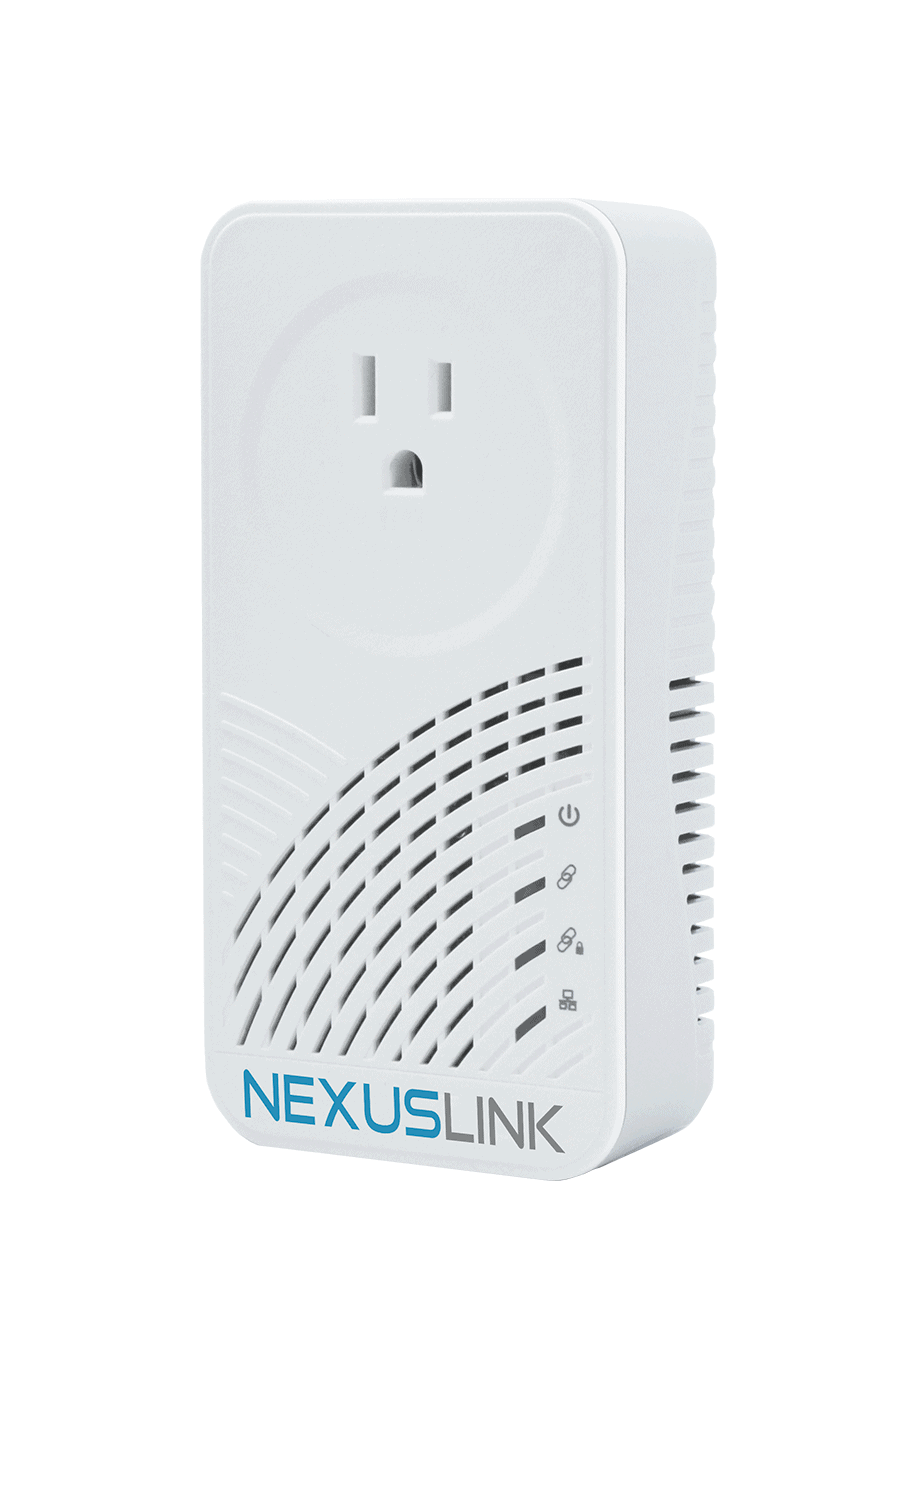 NEXUSLINK 1 Nexuslink ghn Ethernet Over coax Adapter 2000 Mbps, Fast and  Secure Network Performance, Online gaming and Streaming in Hard-to